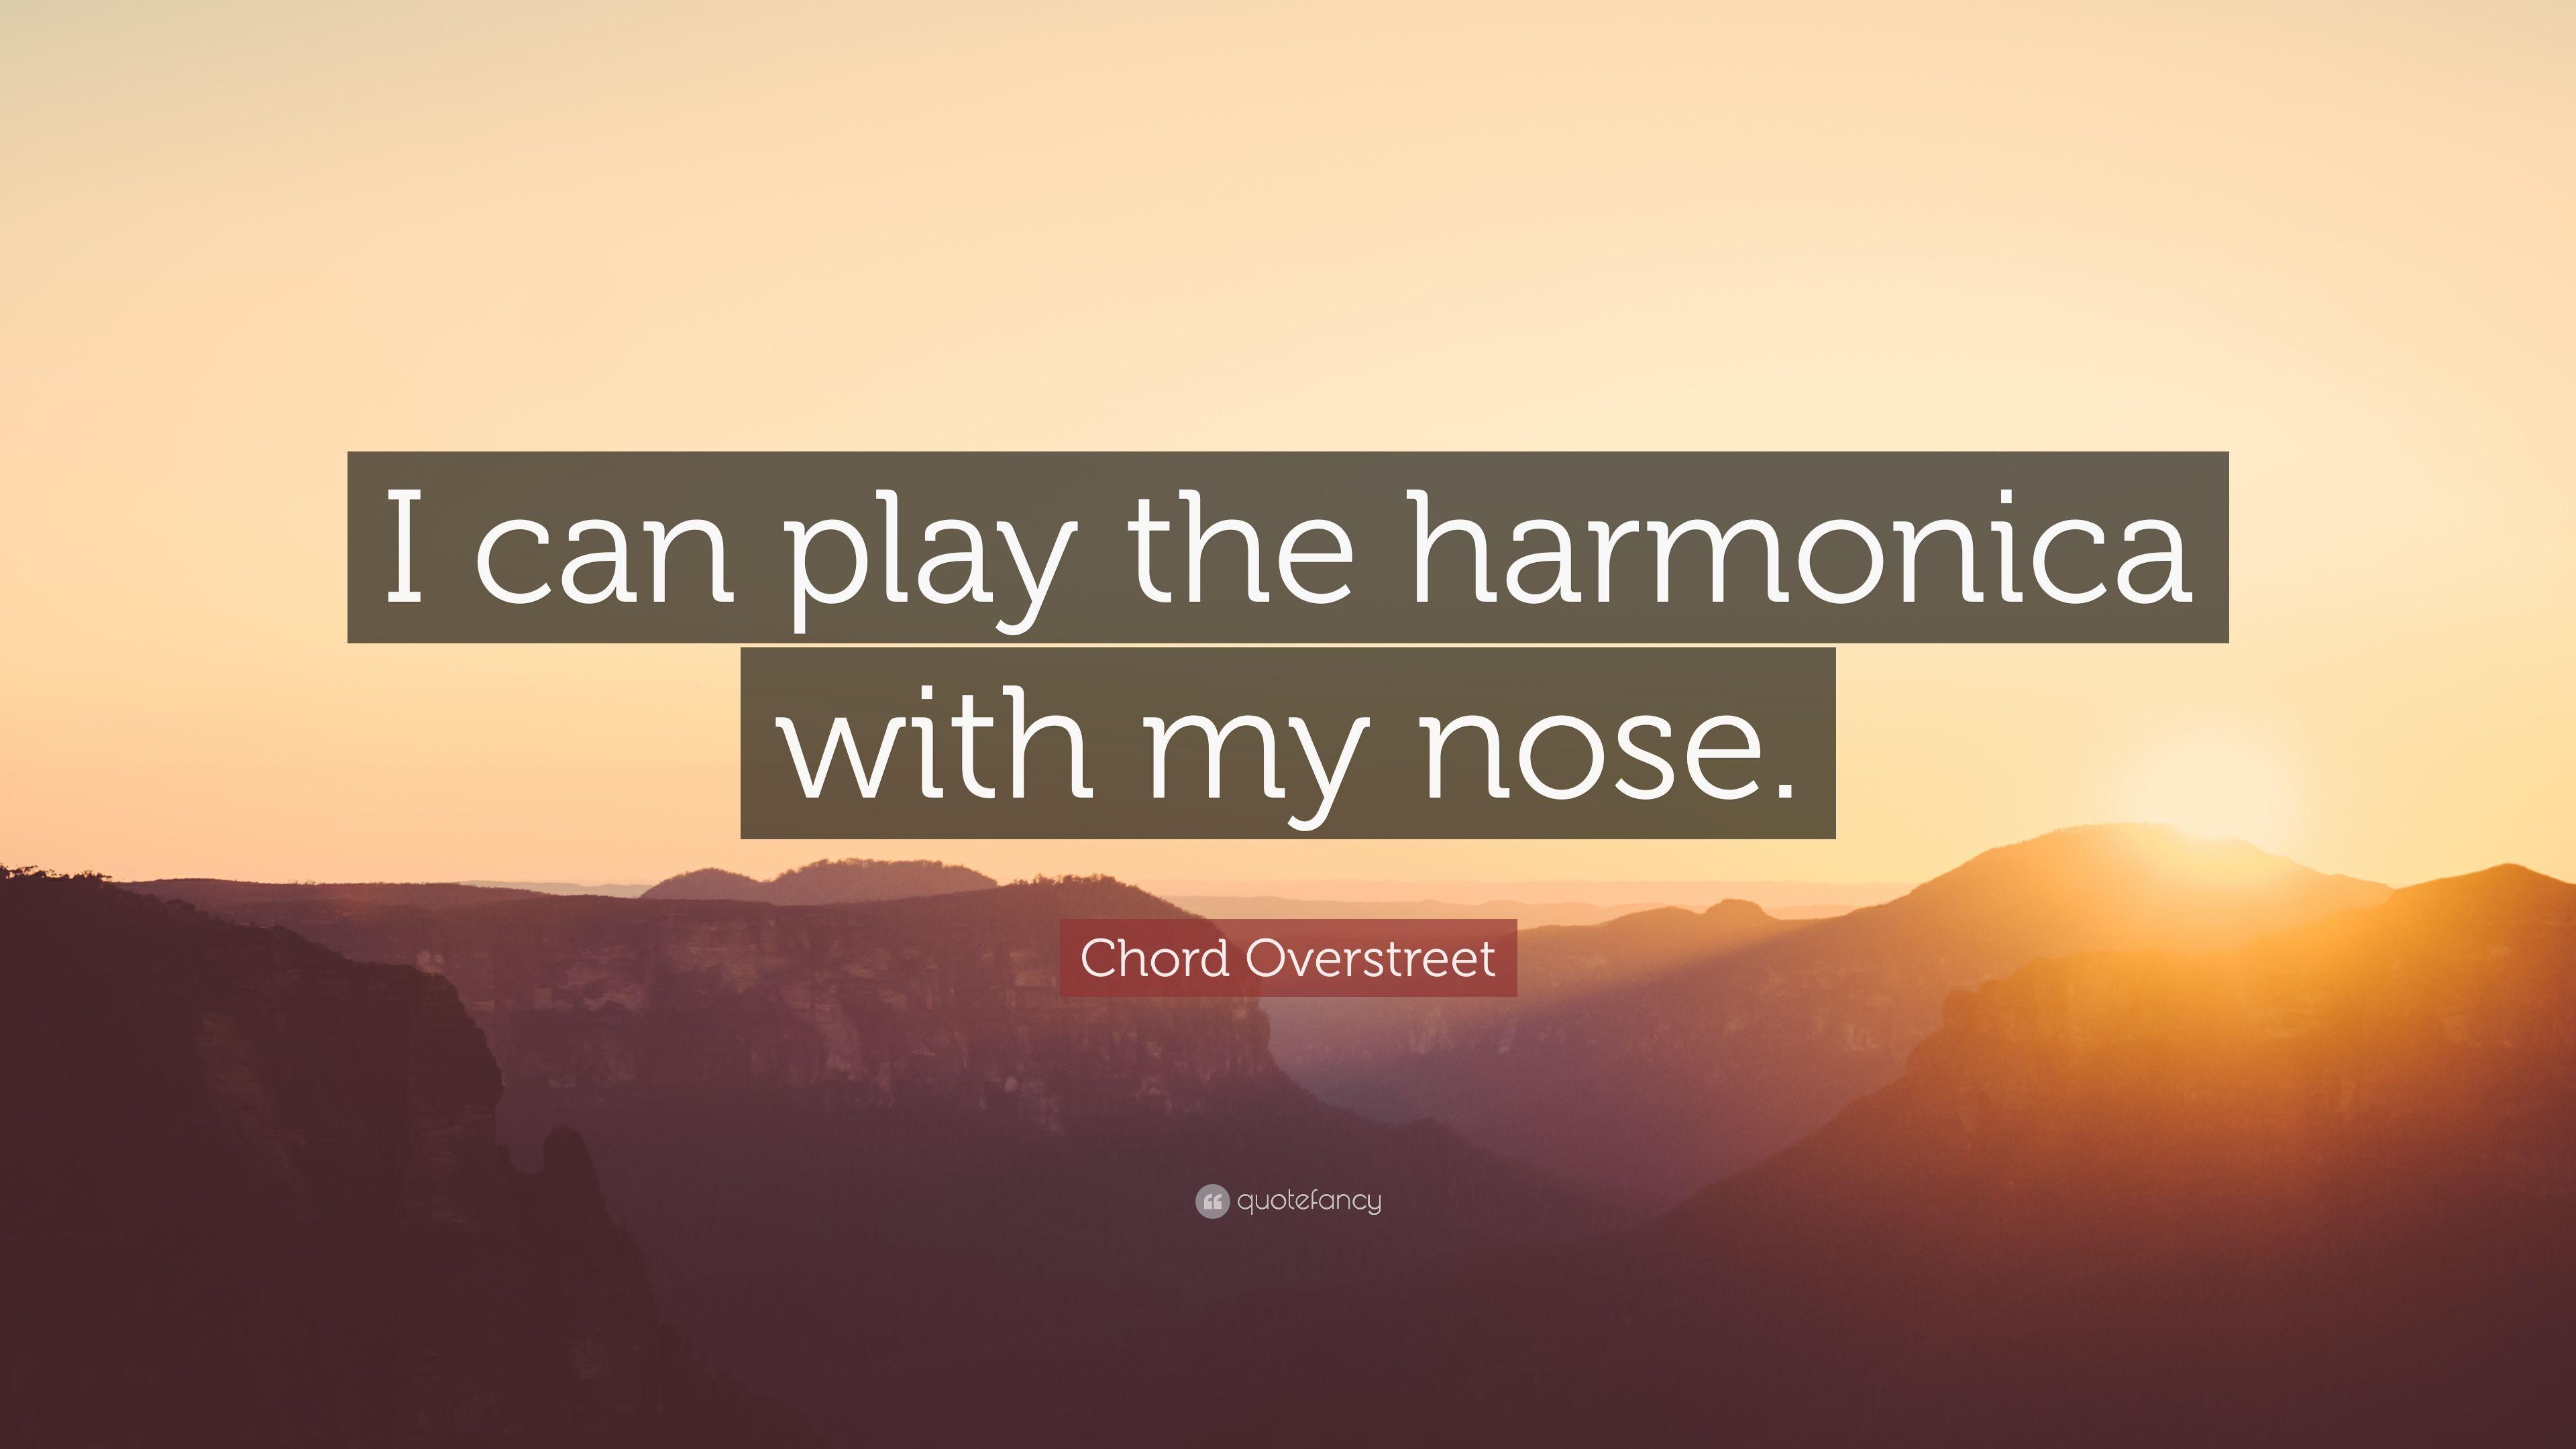 Chord Overstreet Quote: “I can play the harmonica with my nose.” 7